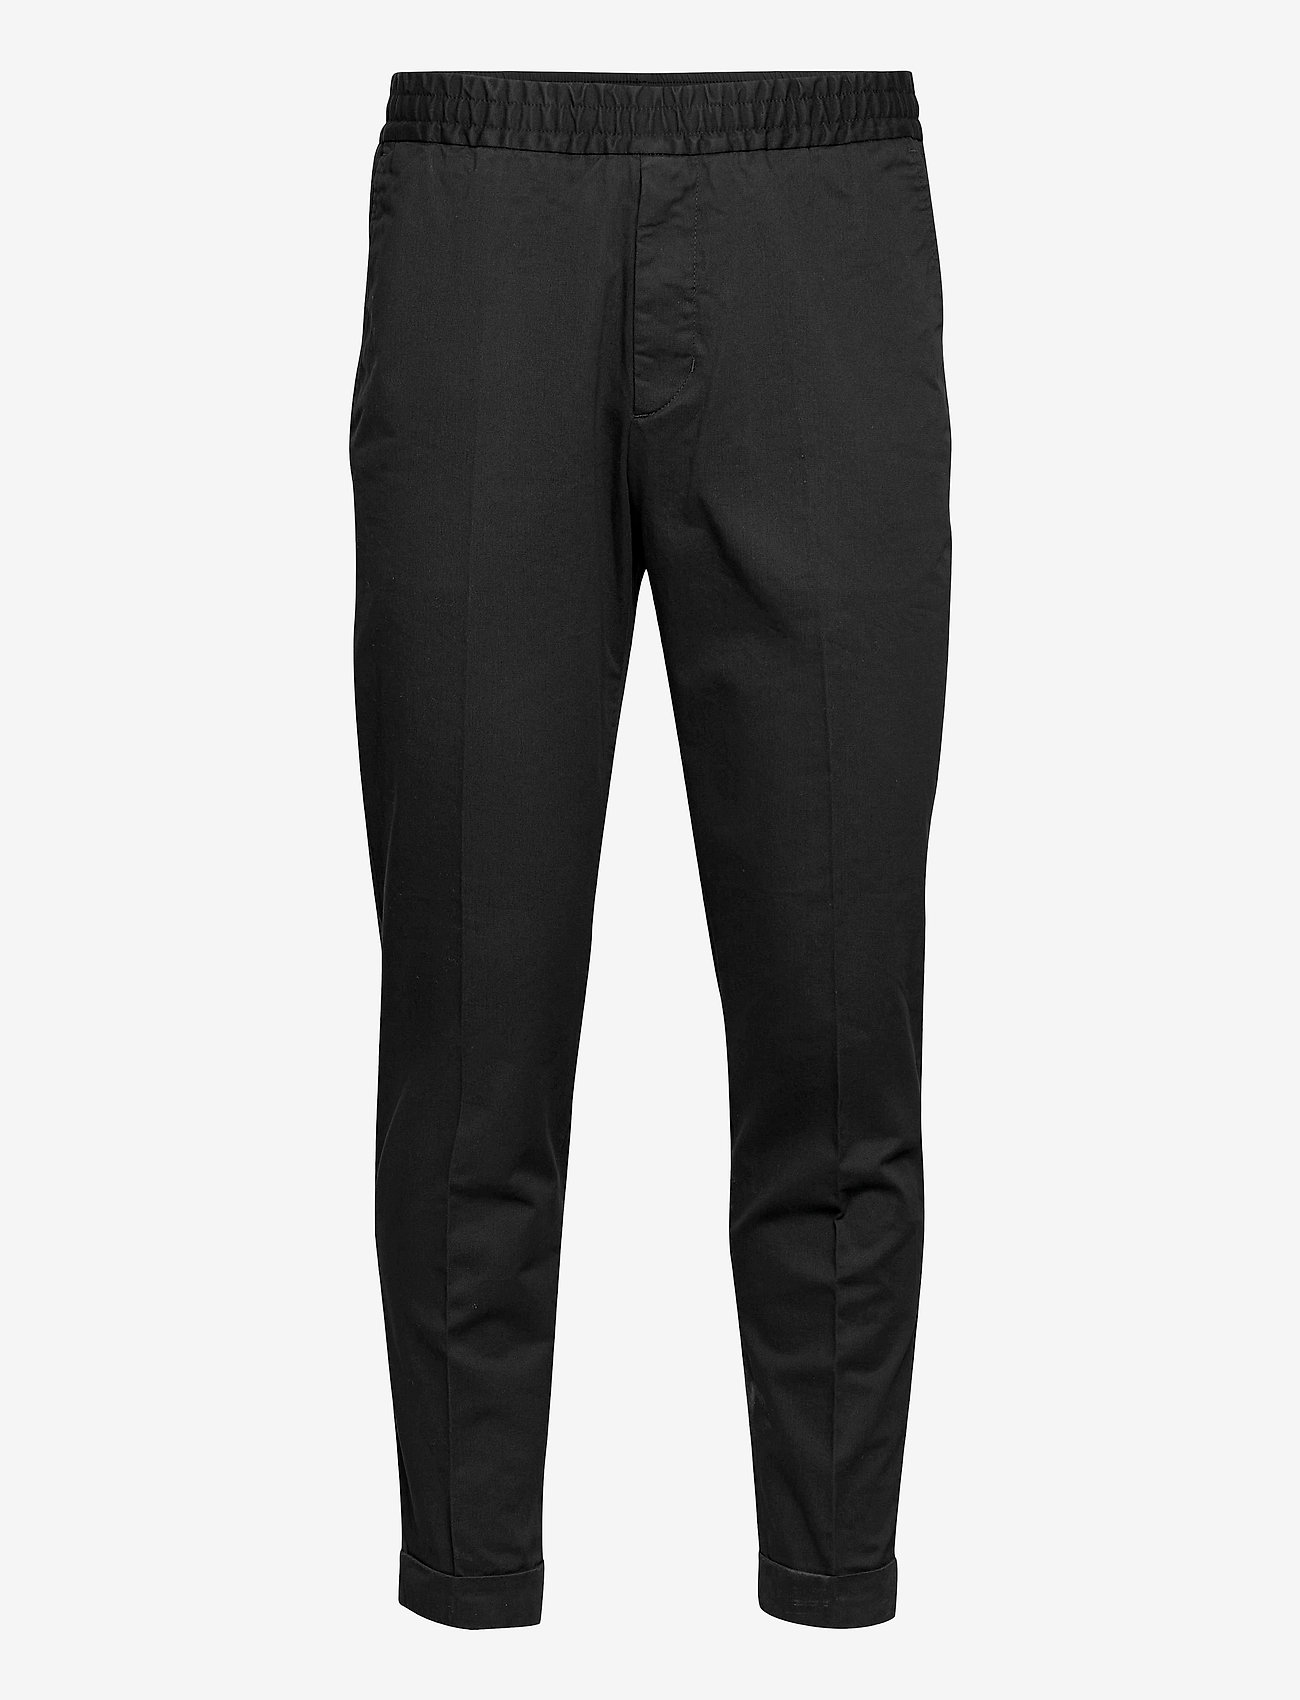 Buy BLACKBERRYS Cotton Polyester Terry Slim Fit Mens Trousers  Shoppers  Stop